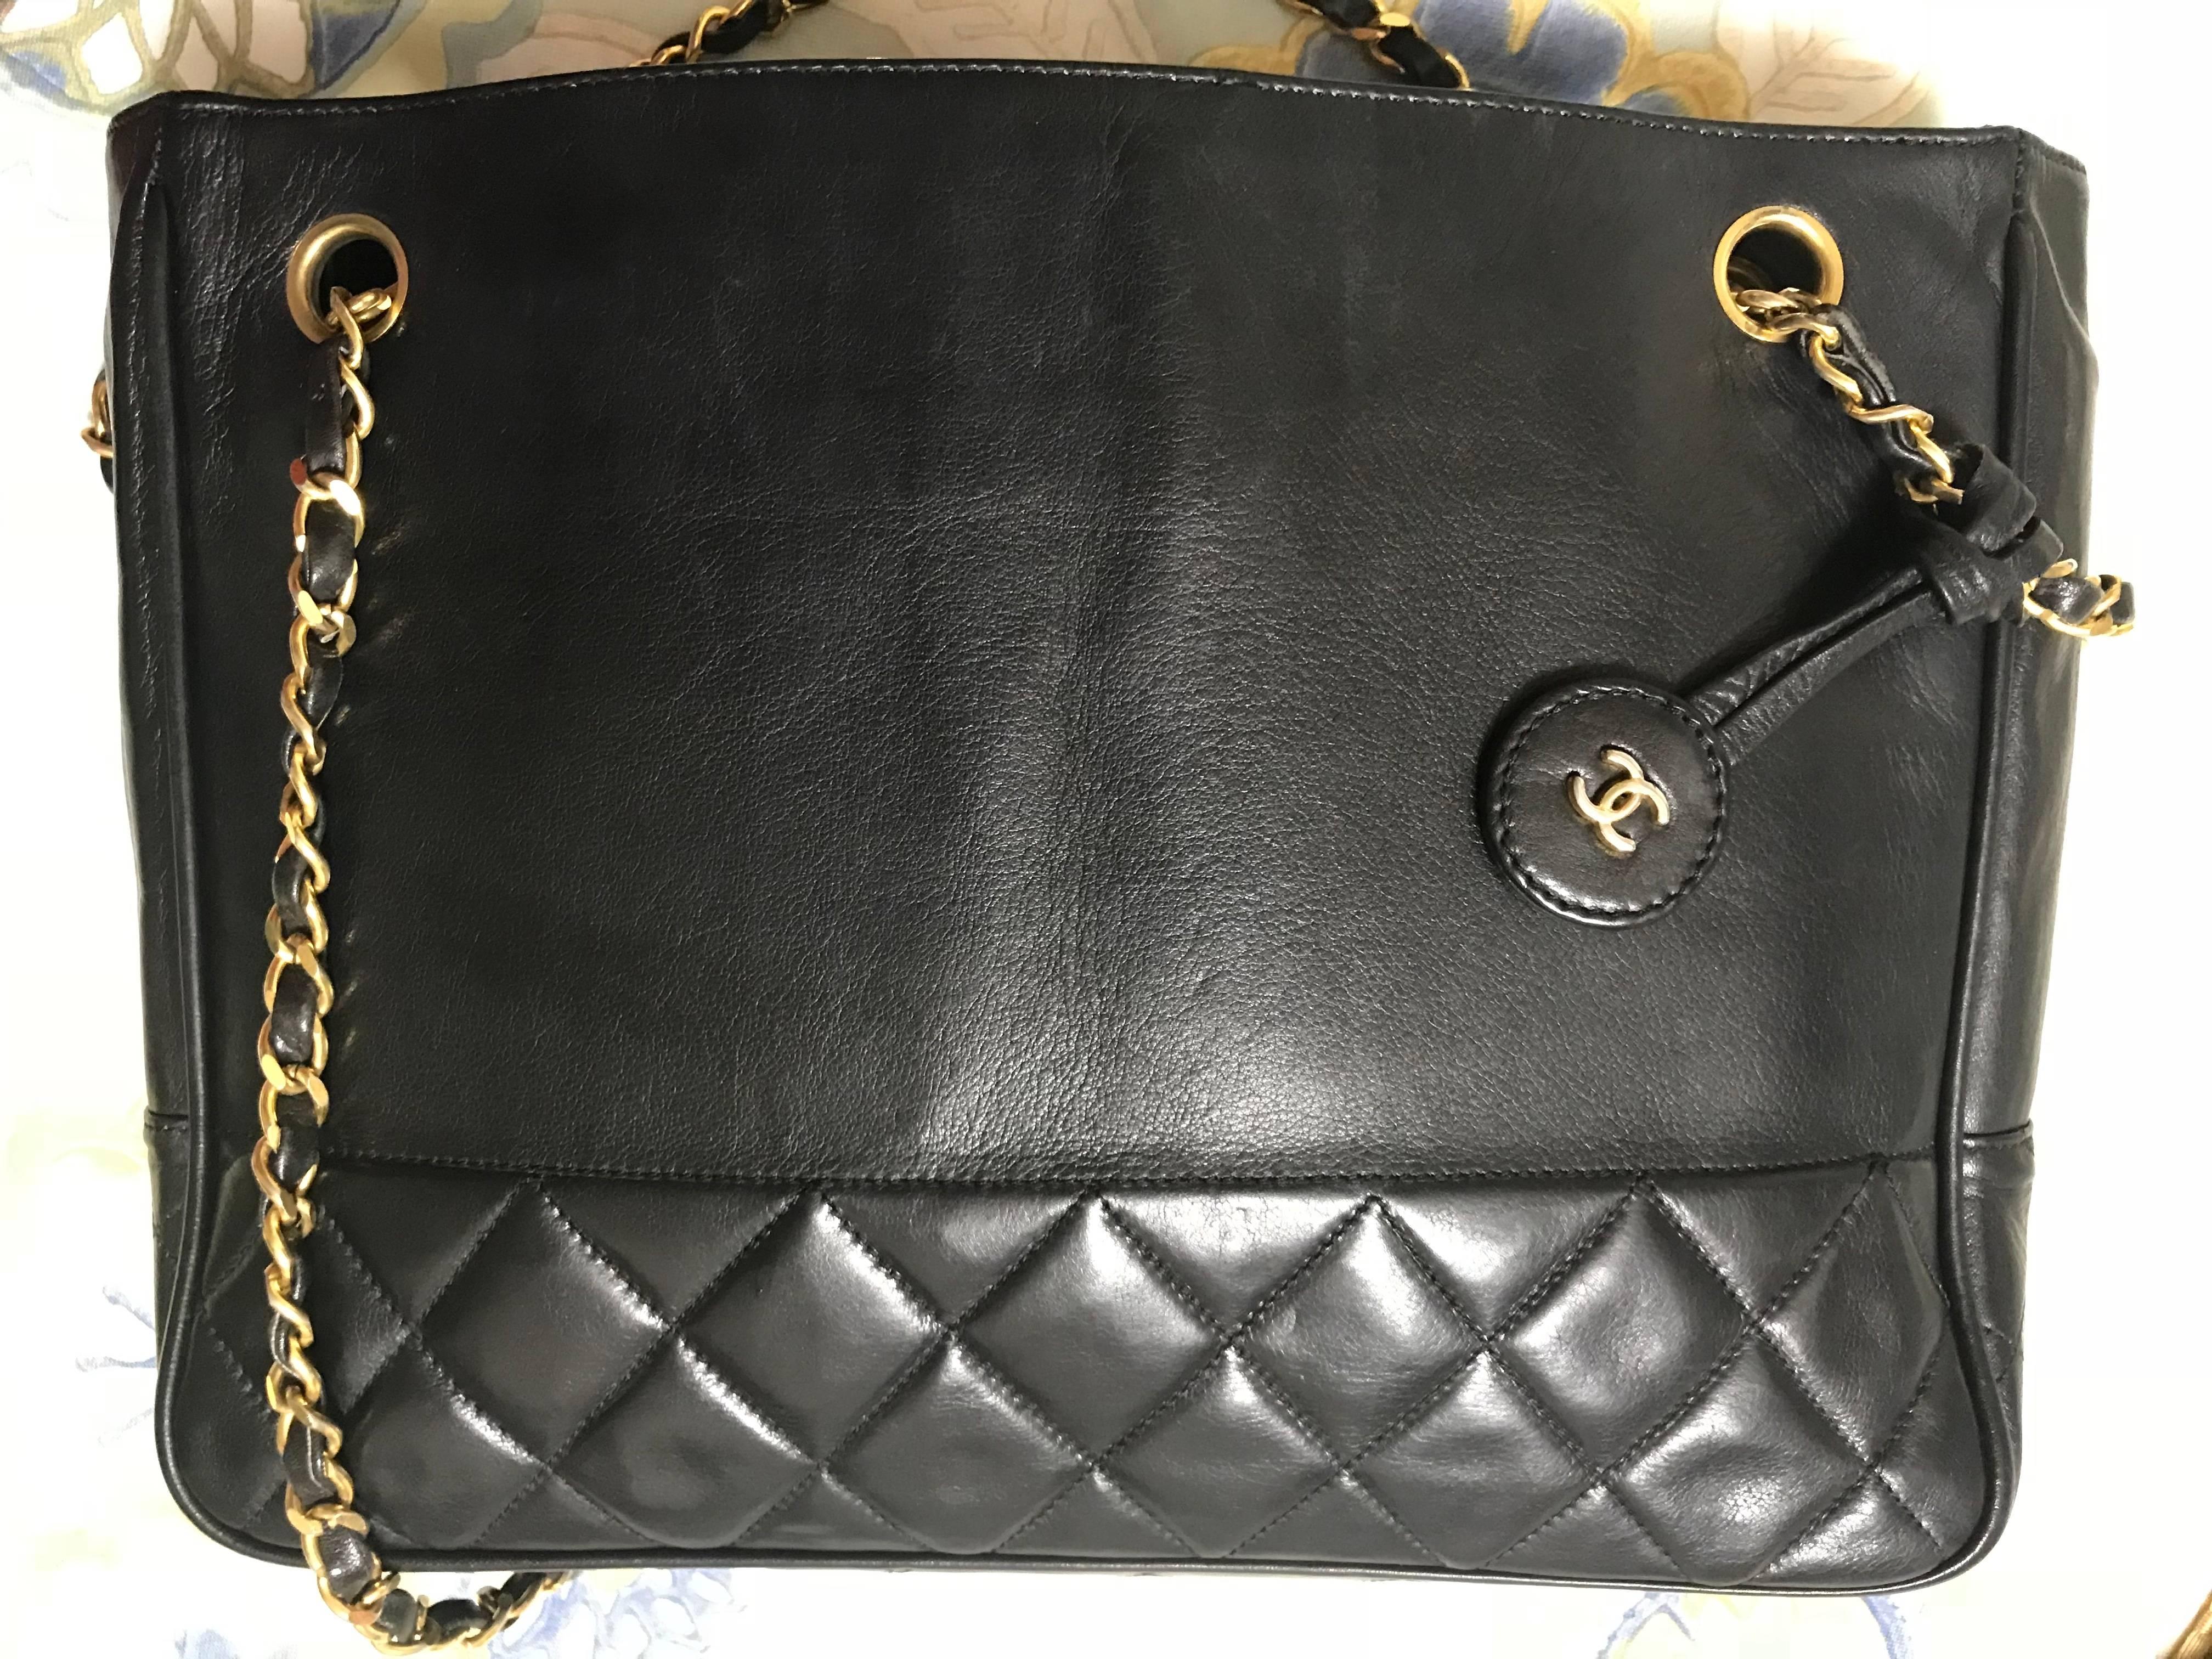 1980s. Vintage CHANEL classic black leather shoulder bag, tote purse with gold tone chains and CC charm. Classic purse.

Introducing a vintage CHANEL black color leather shoulder bag from 80's.
Classic bag for many occasions!

Featuring its iconic